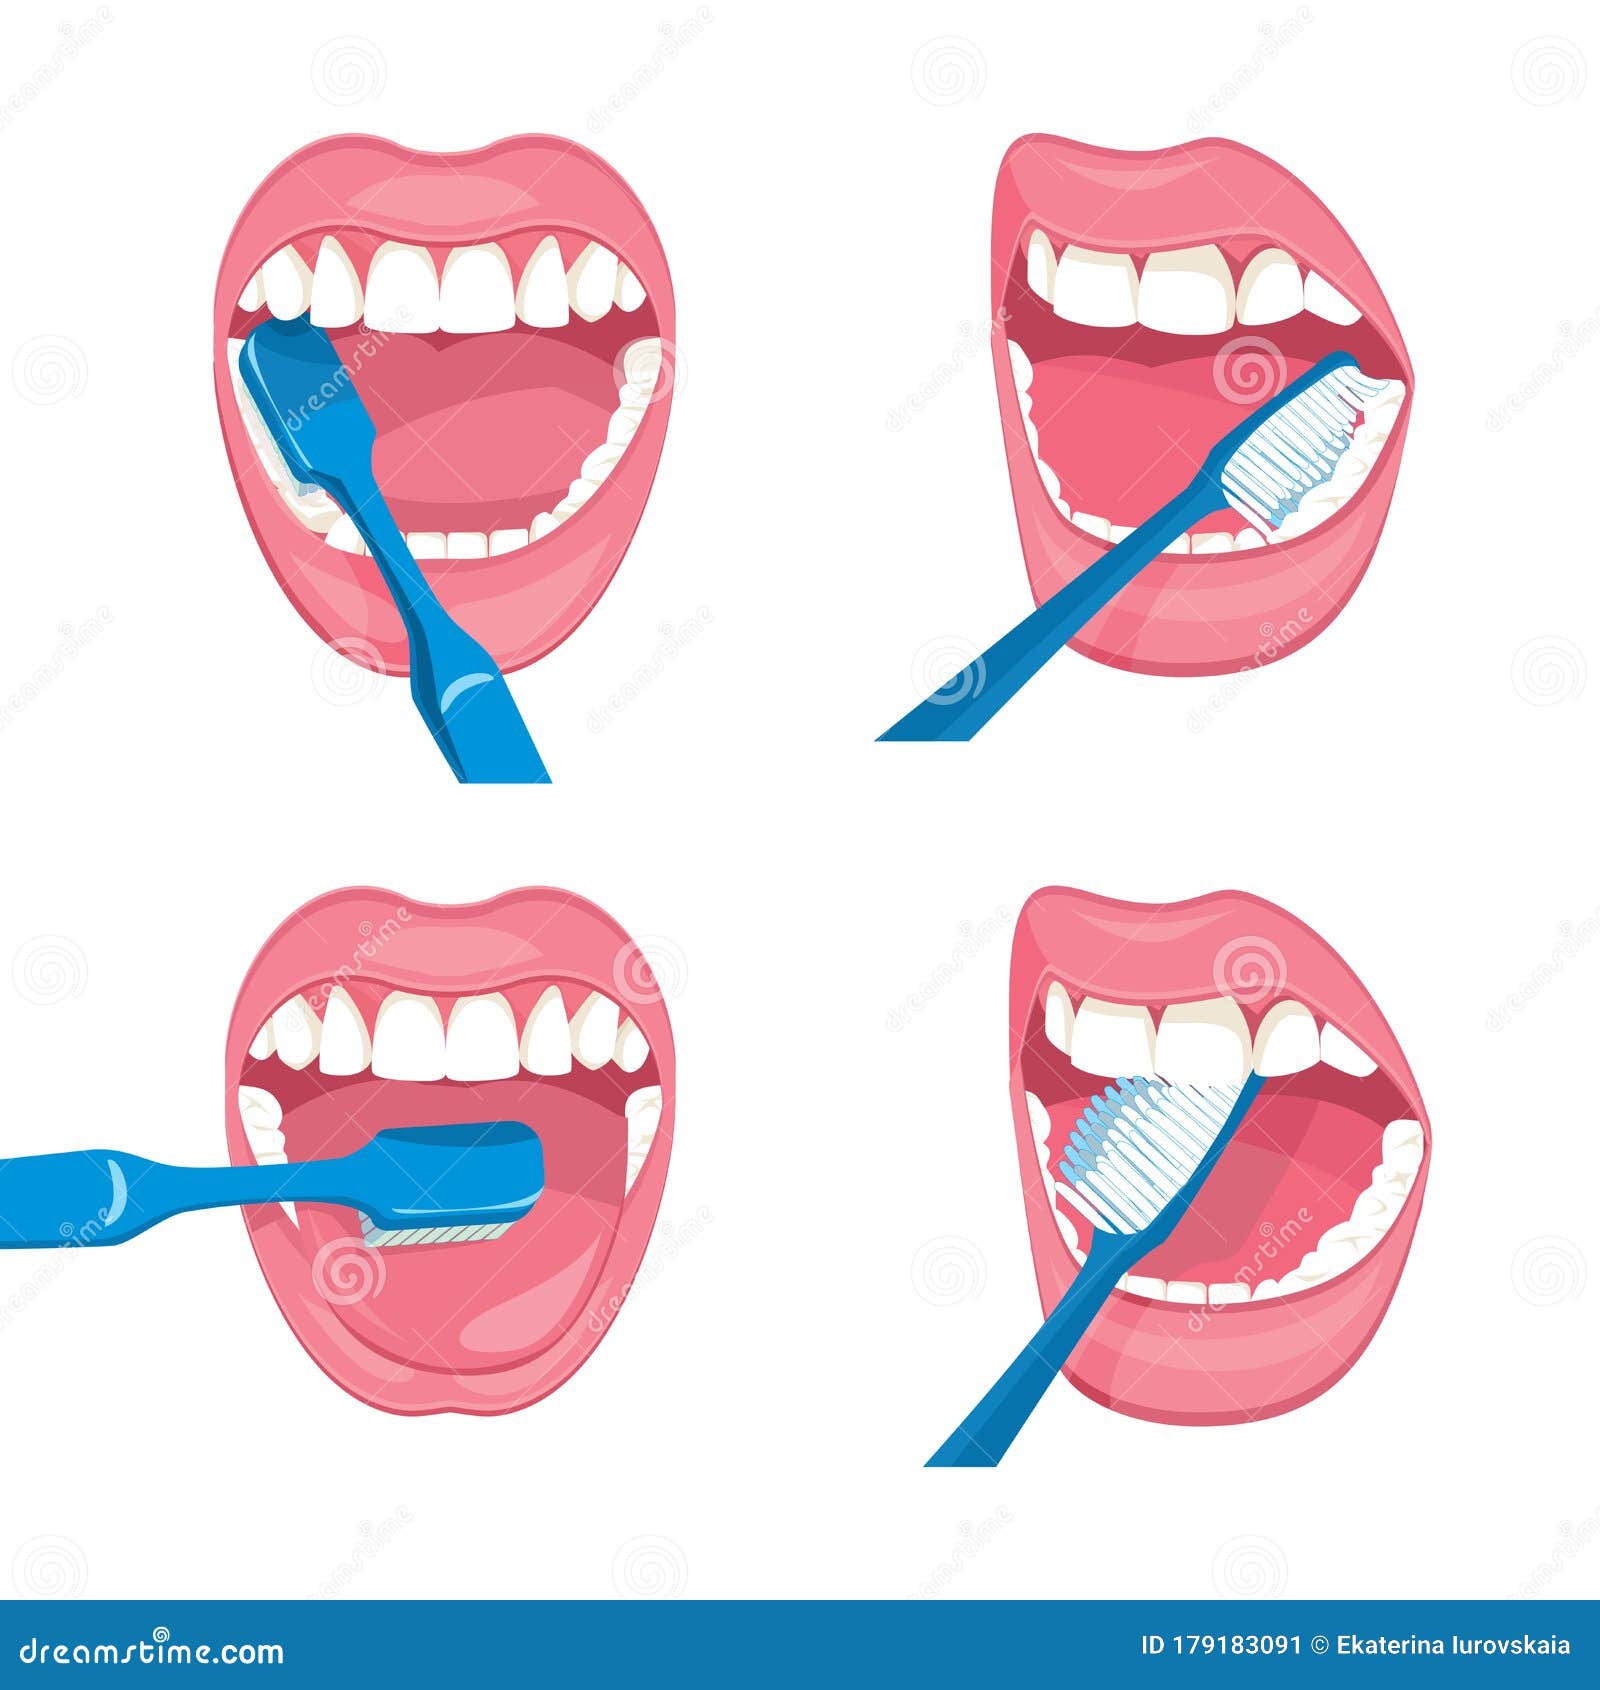 instructions how to properly brush your teeth toothbrush oral hygiene instructions how to properly brush your teeth 179183091